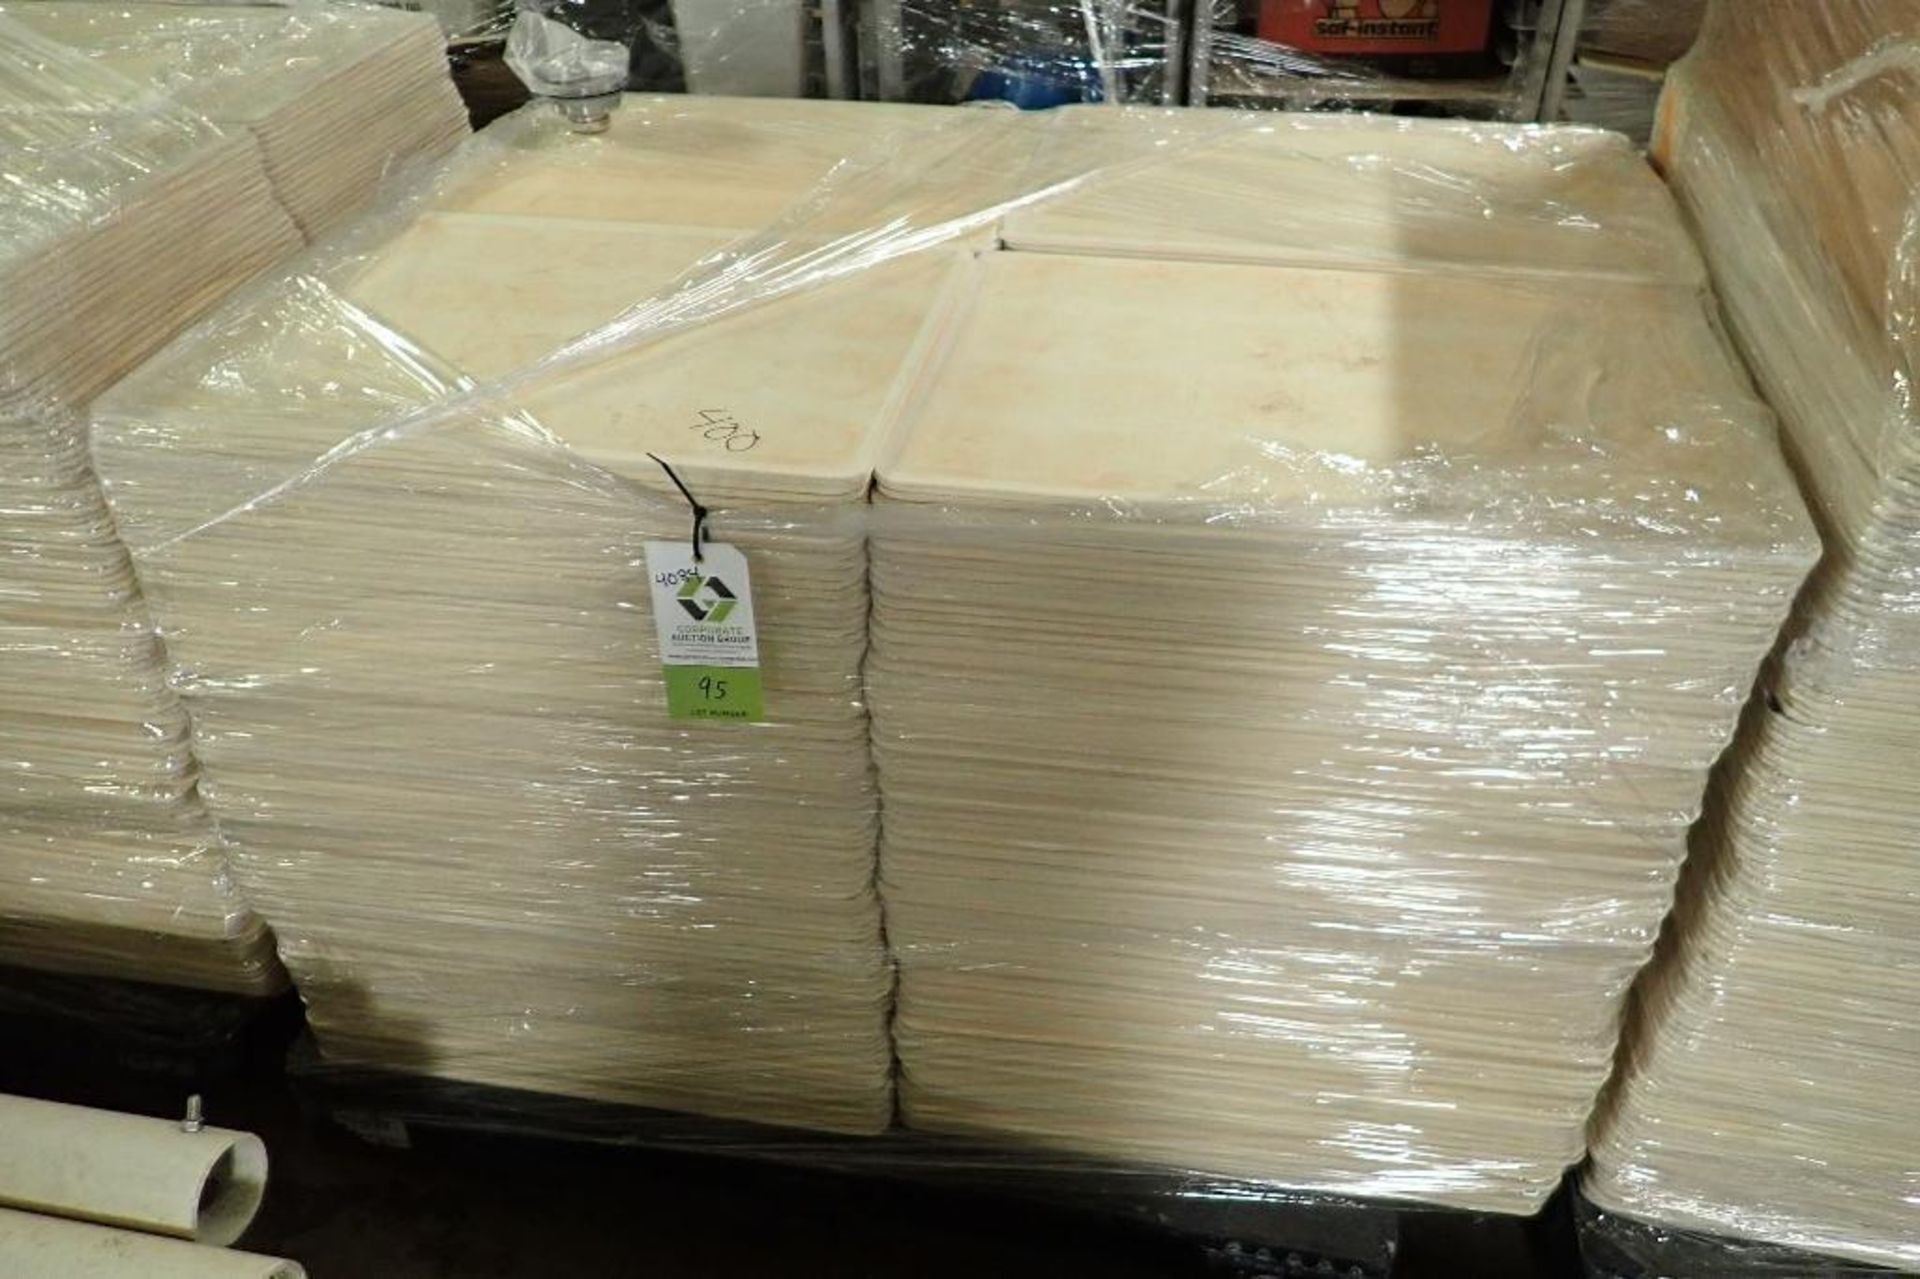 MFG Tray, molded fiberglass trays, 18 in. x 26 in., approx. 400, (1) skid **Rigging FEE: $25 **